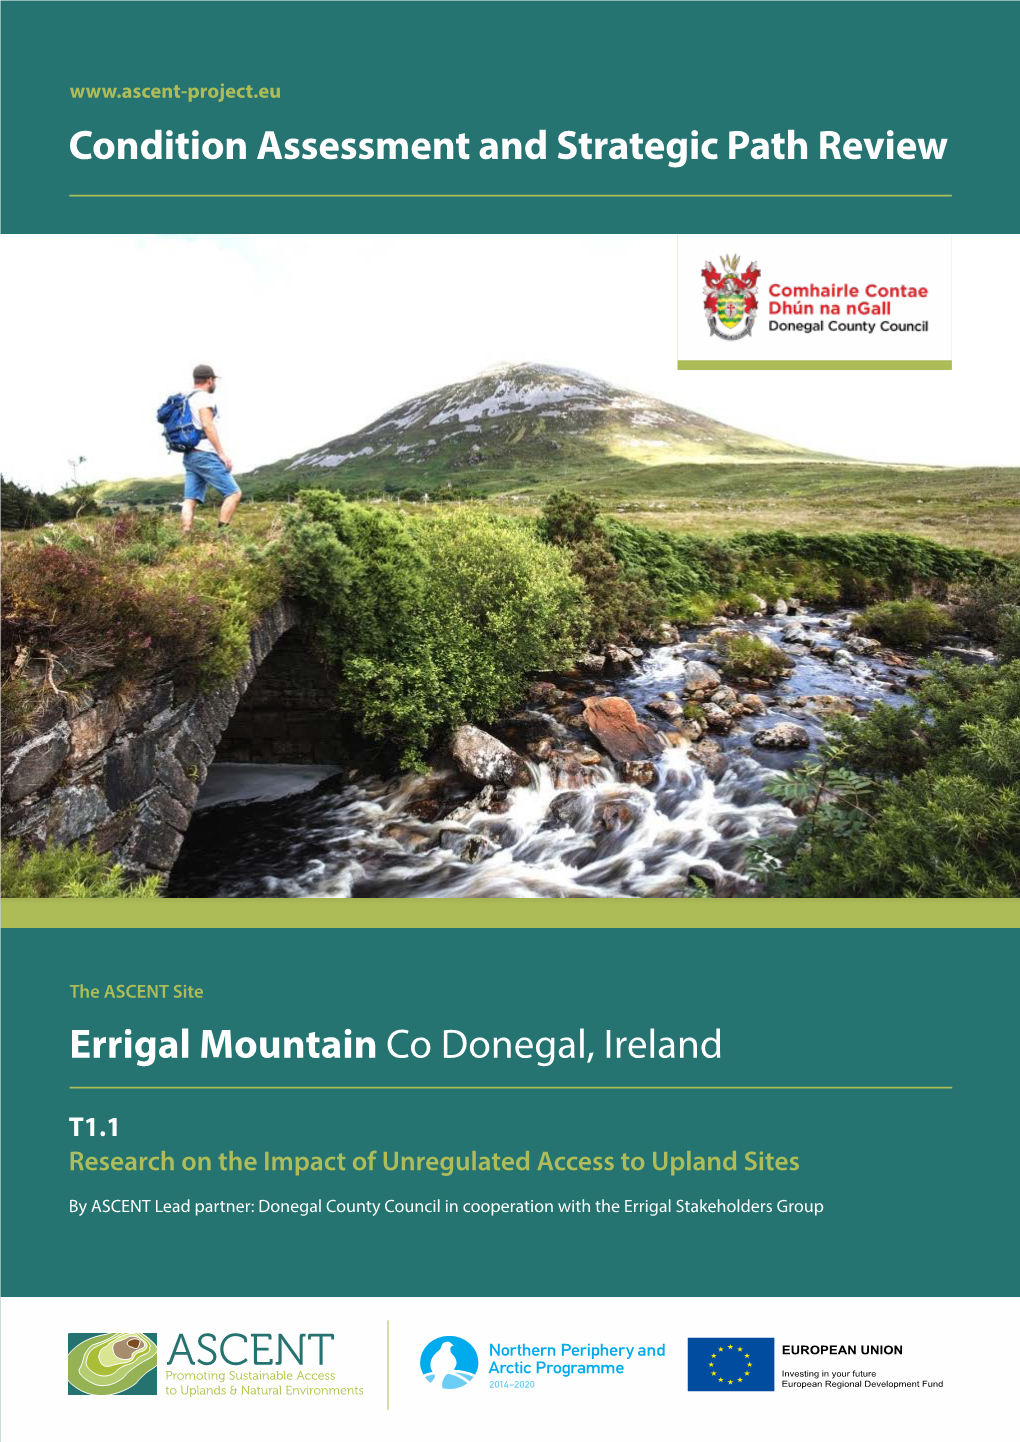 Errigal Mountain Co Donegal, Ireland Condition Assessment And